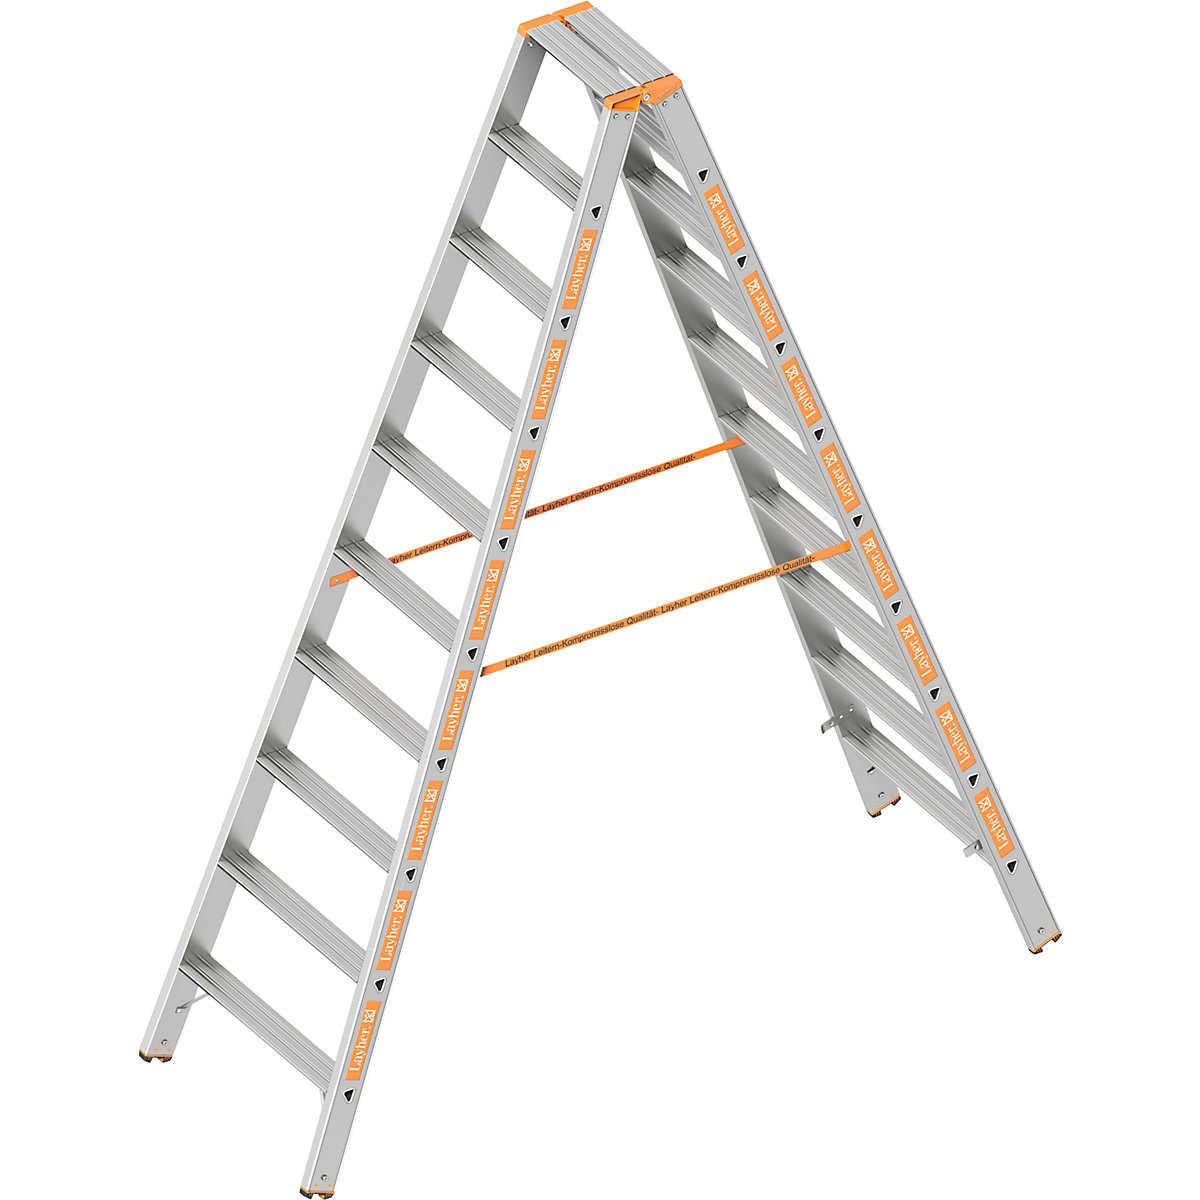 Step ladder – Layher, double sided access, 2 x 10 steps-4